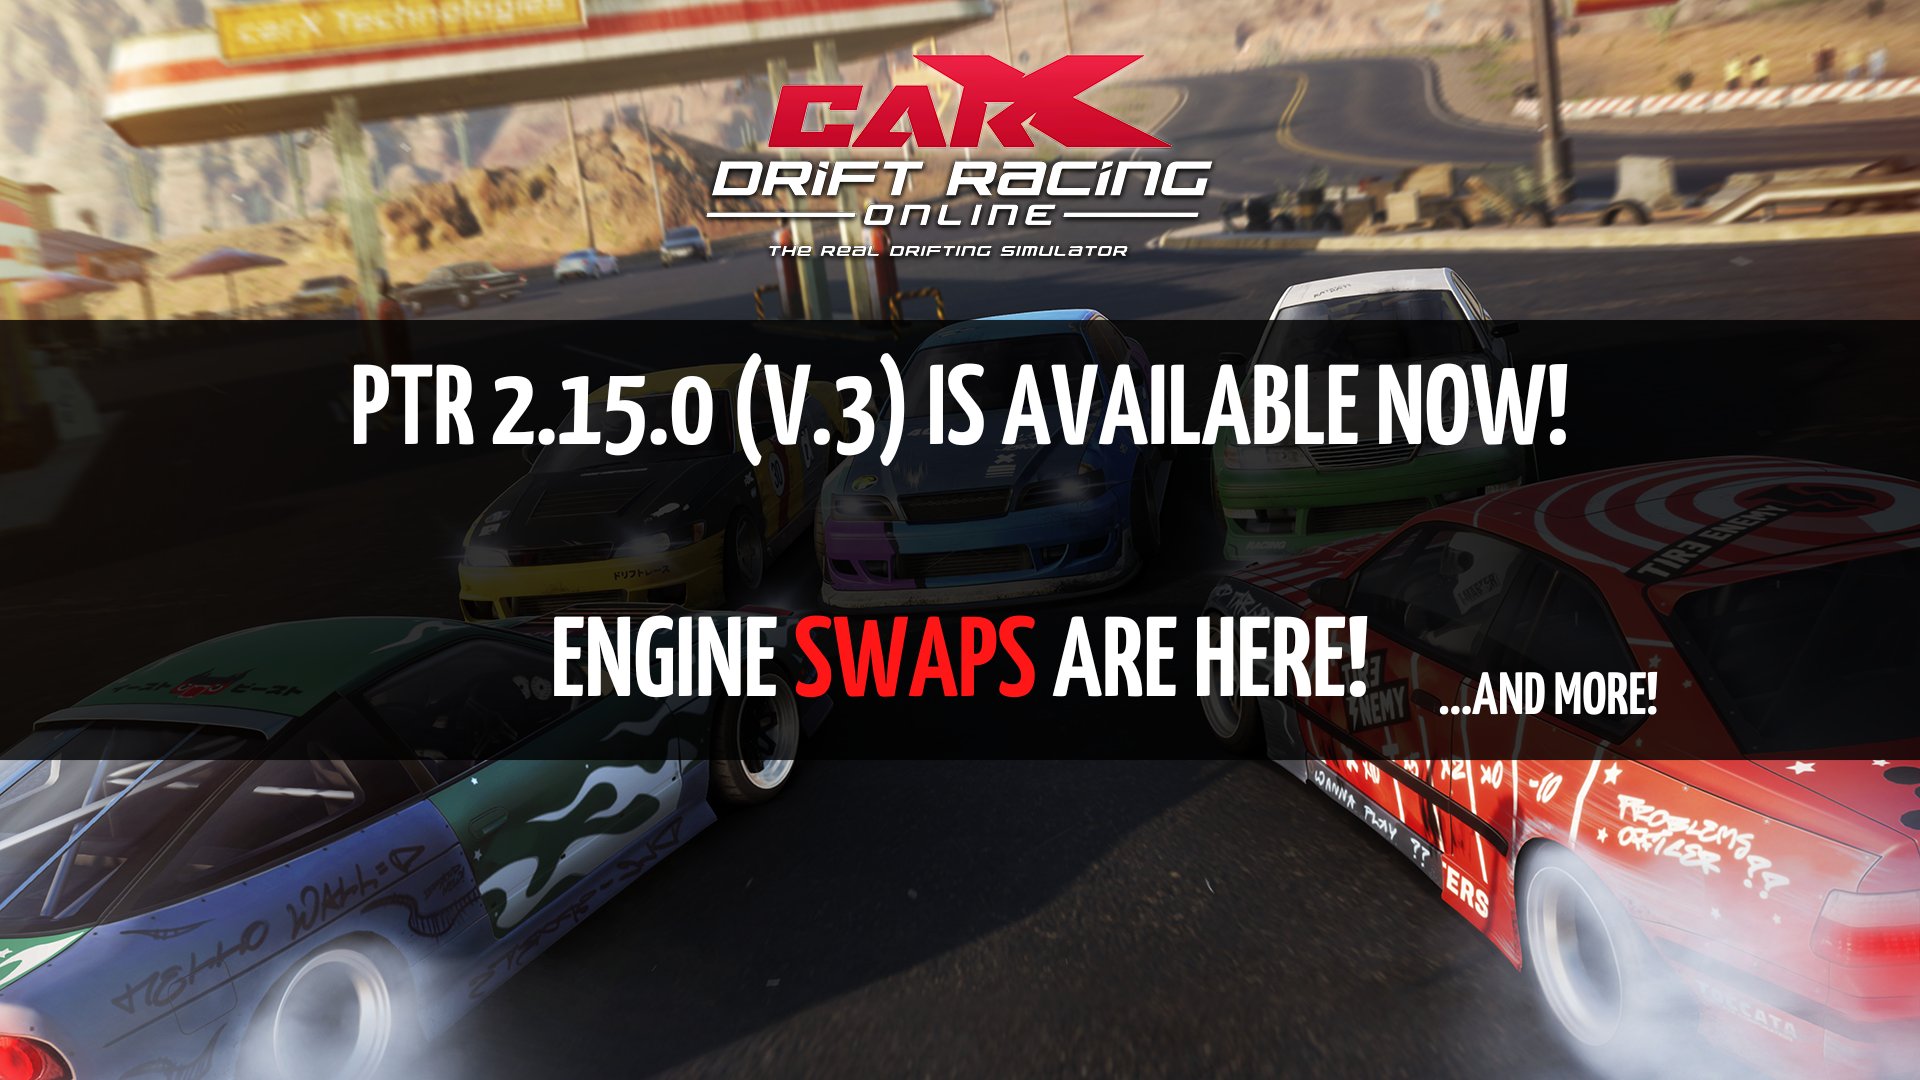 CarX Drift Racing Online: What is the PTR Update and when will it